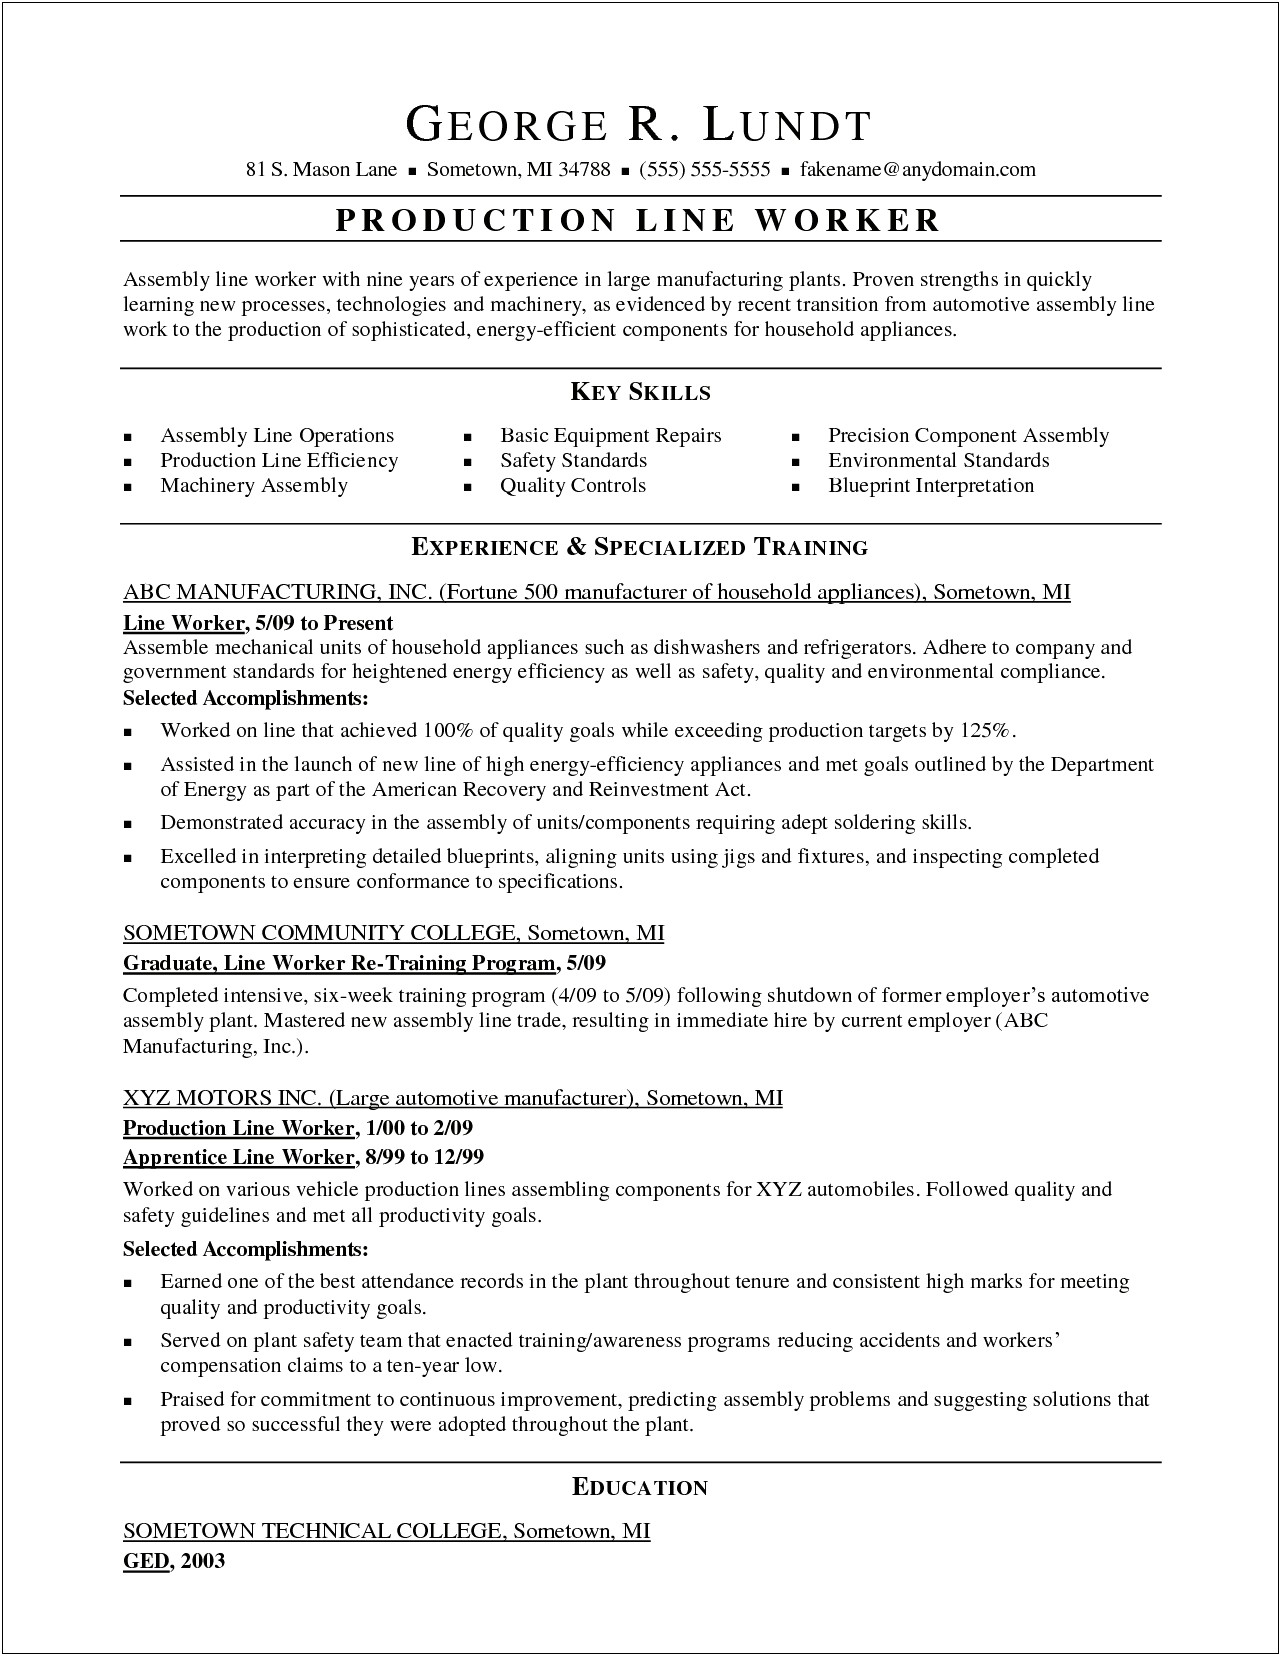 Resume Objective For Assembly Line Worker